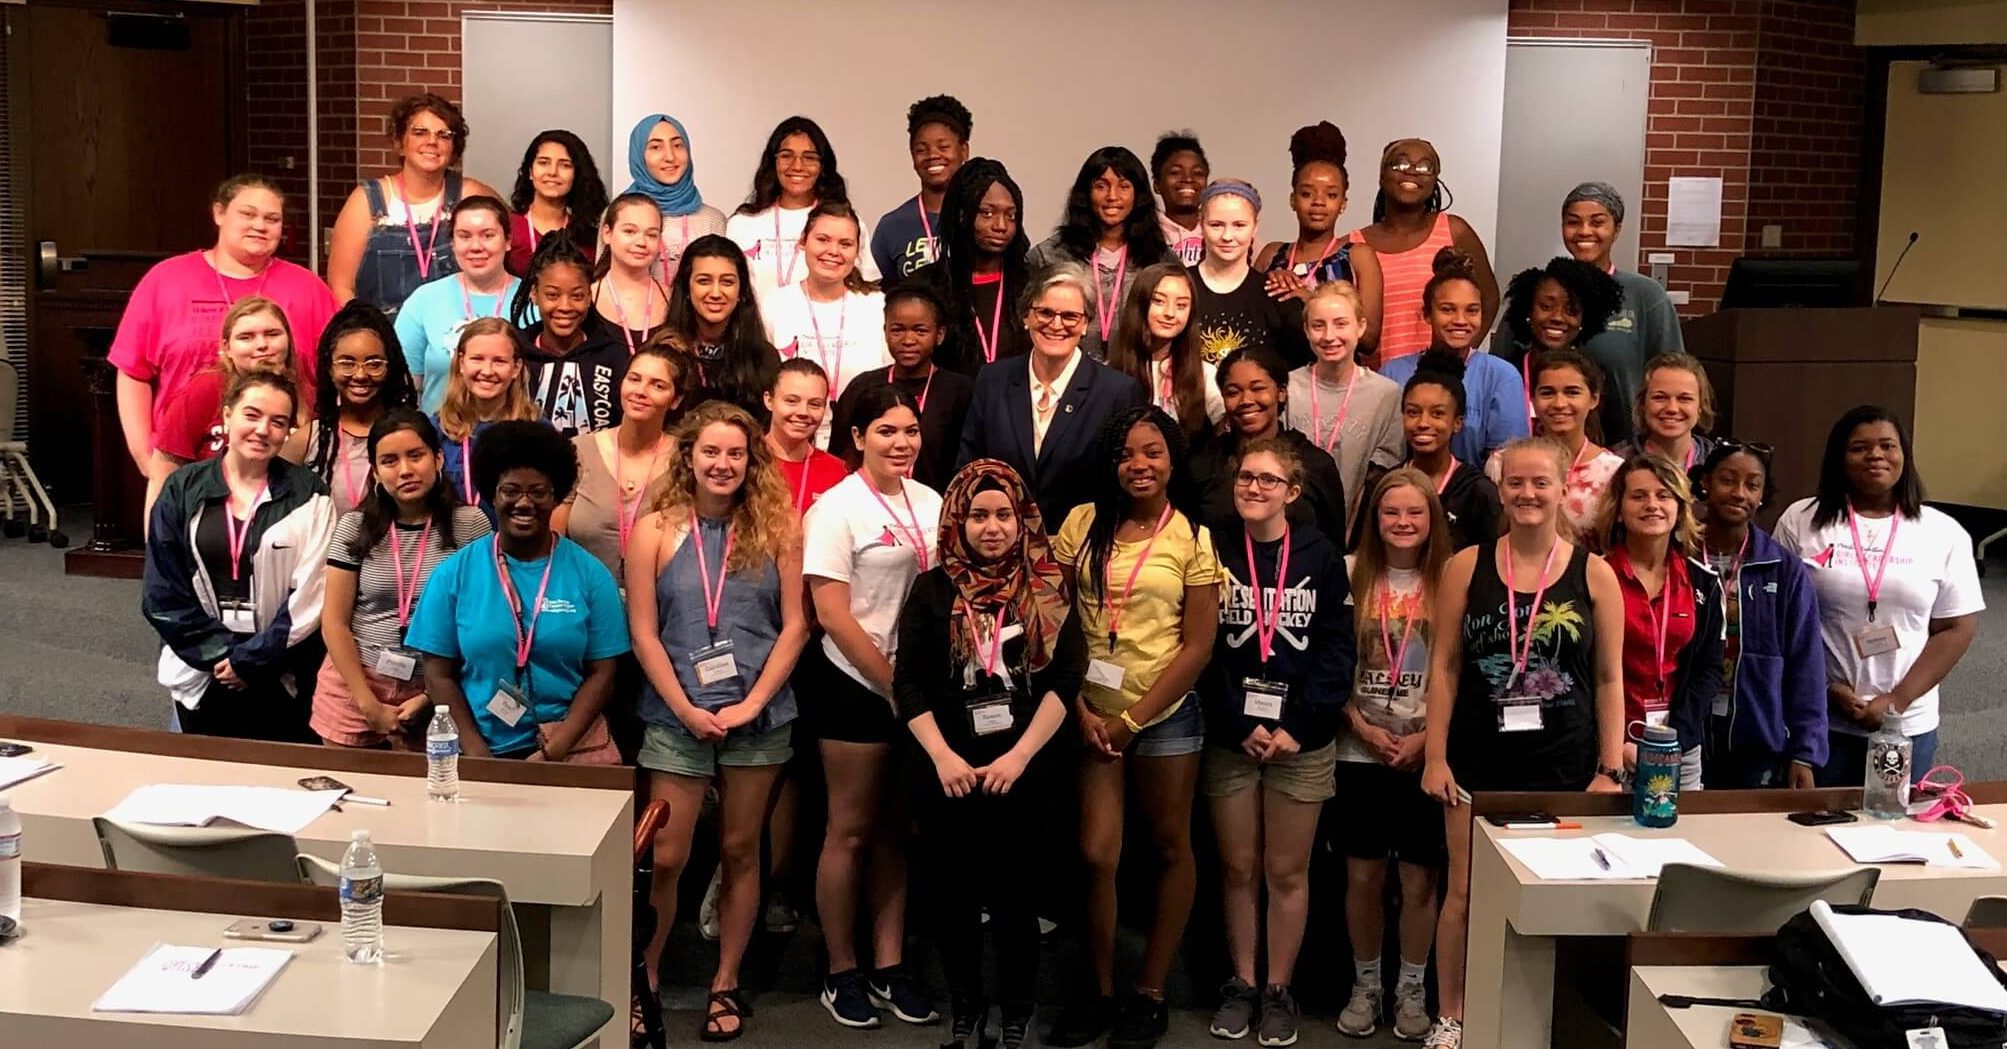 group about 40 teenage girls pose with Spalding President Tori Murden McClure